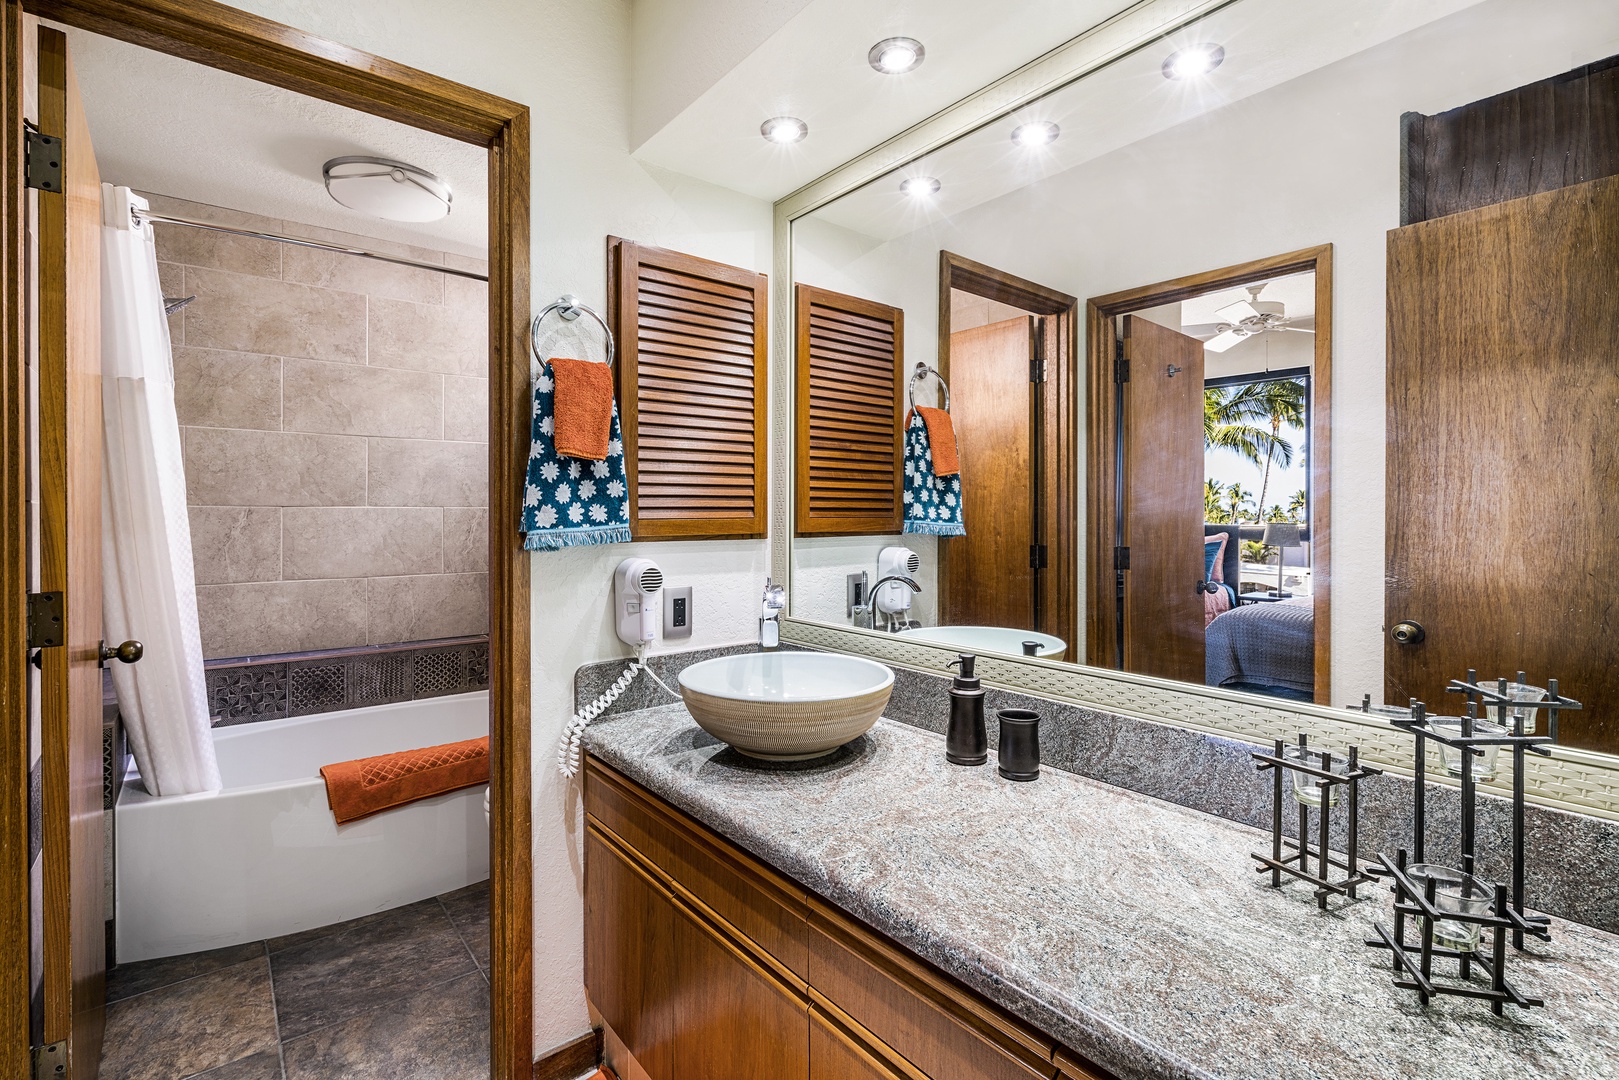 Waikoloa Vacation Rentals, Shores at Waikoloa Beach Resort 332 - Guest bathroom easily accessible from Guest bedroom